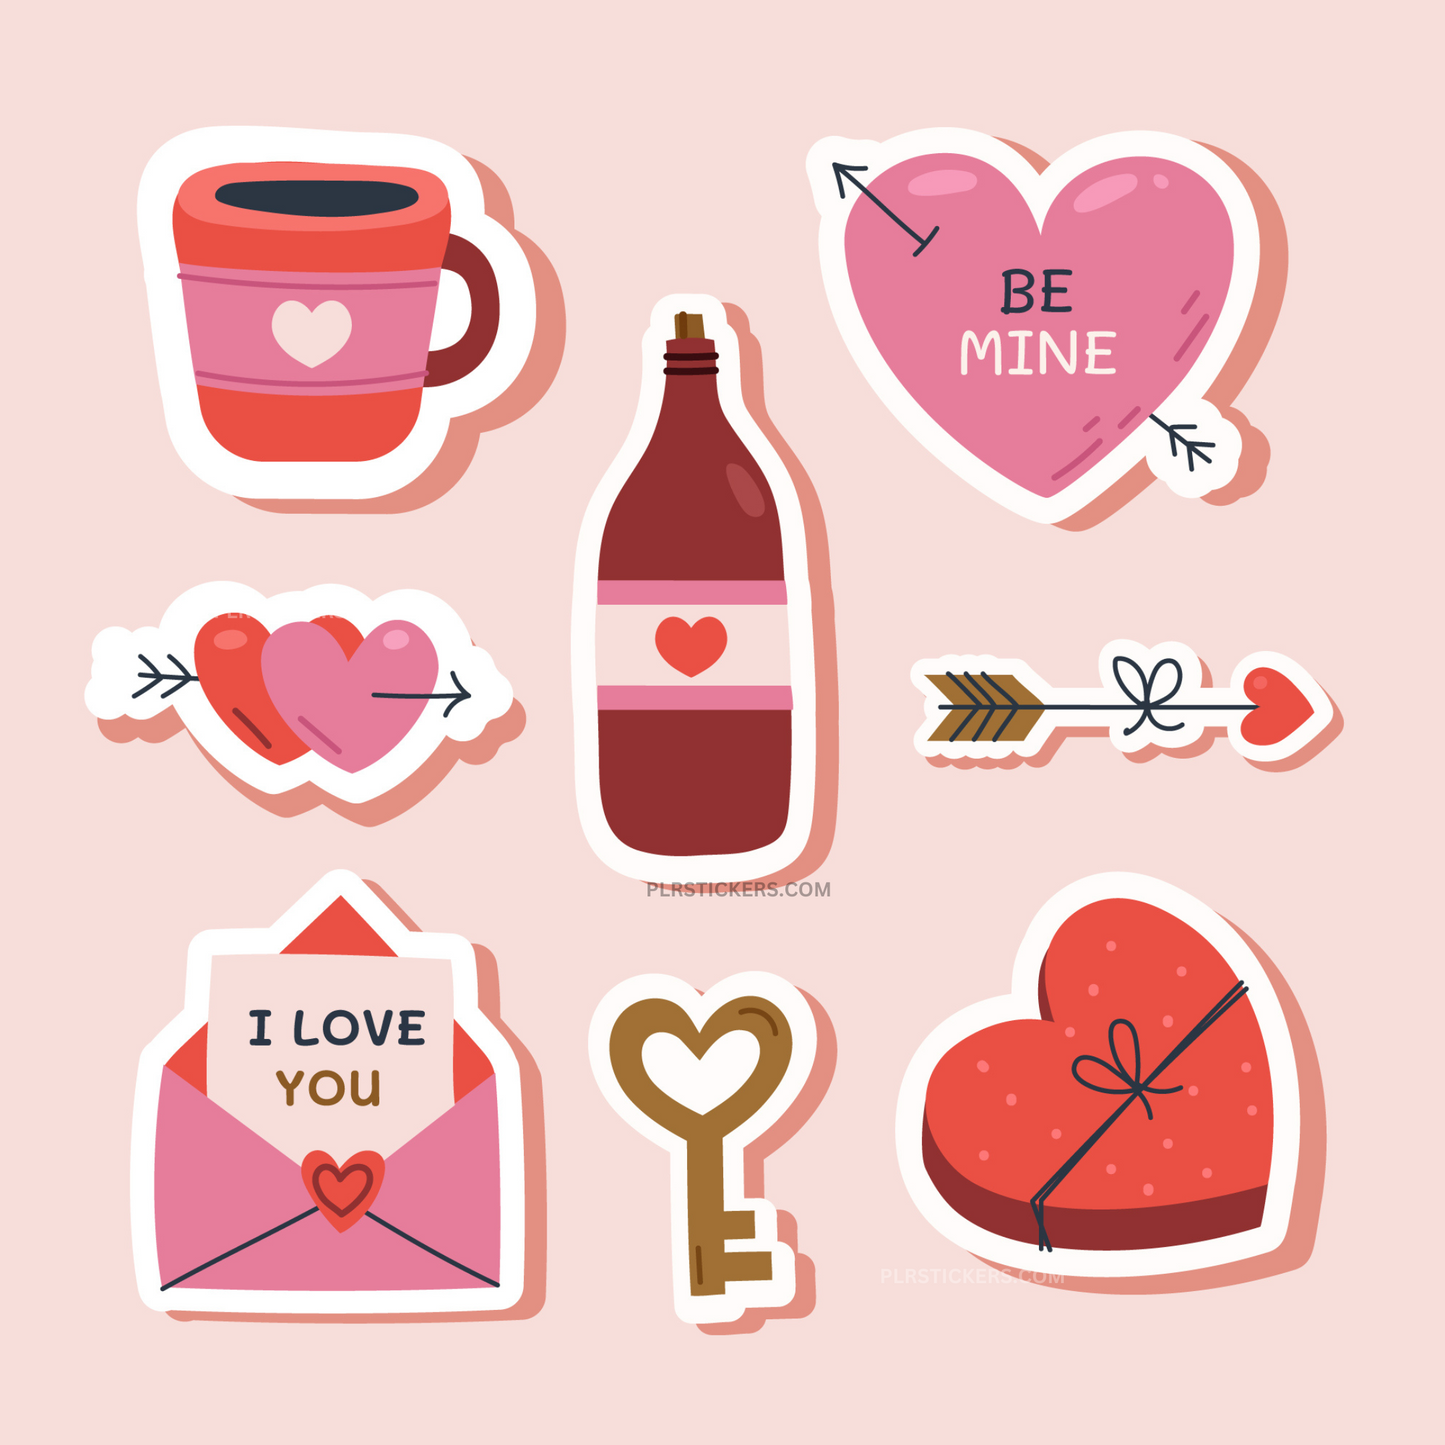 6 Sheets of Cute Valentine's Day Stickers (Bundle Deal!!)